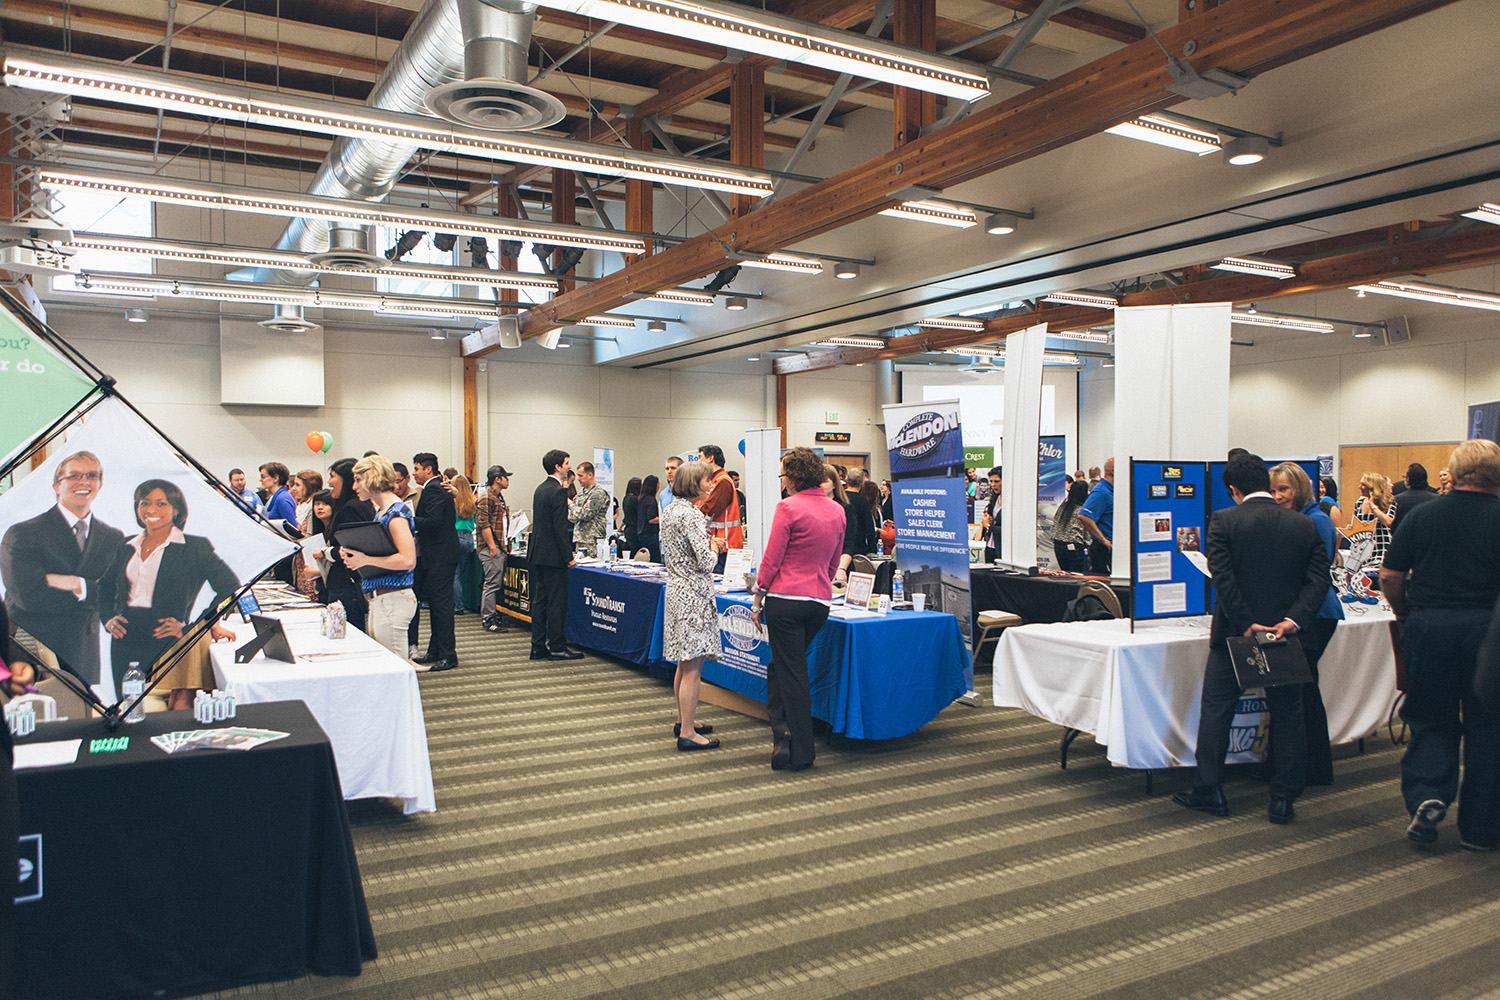 A networking event is held in Upper Gwinn